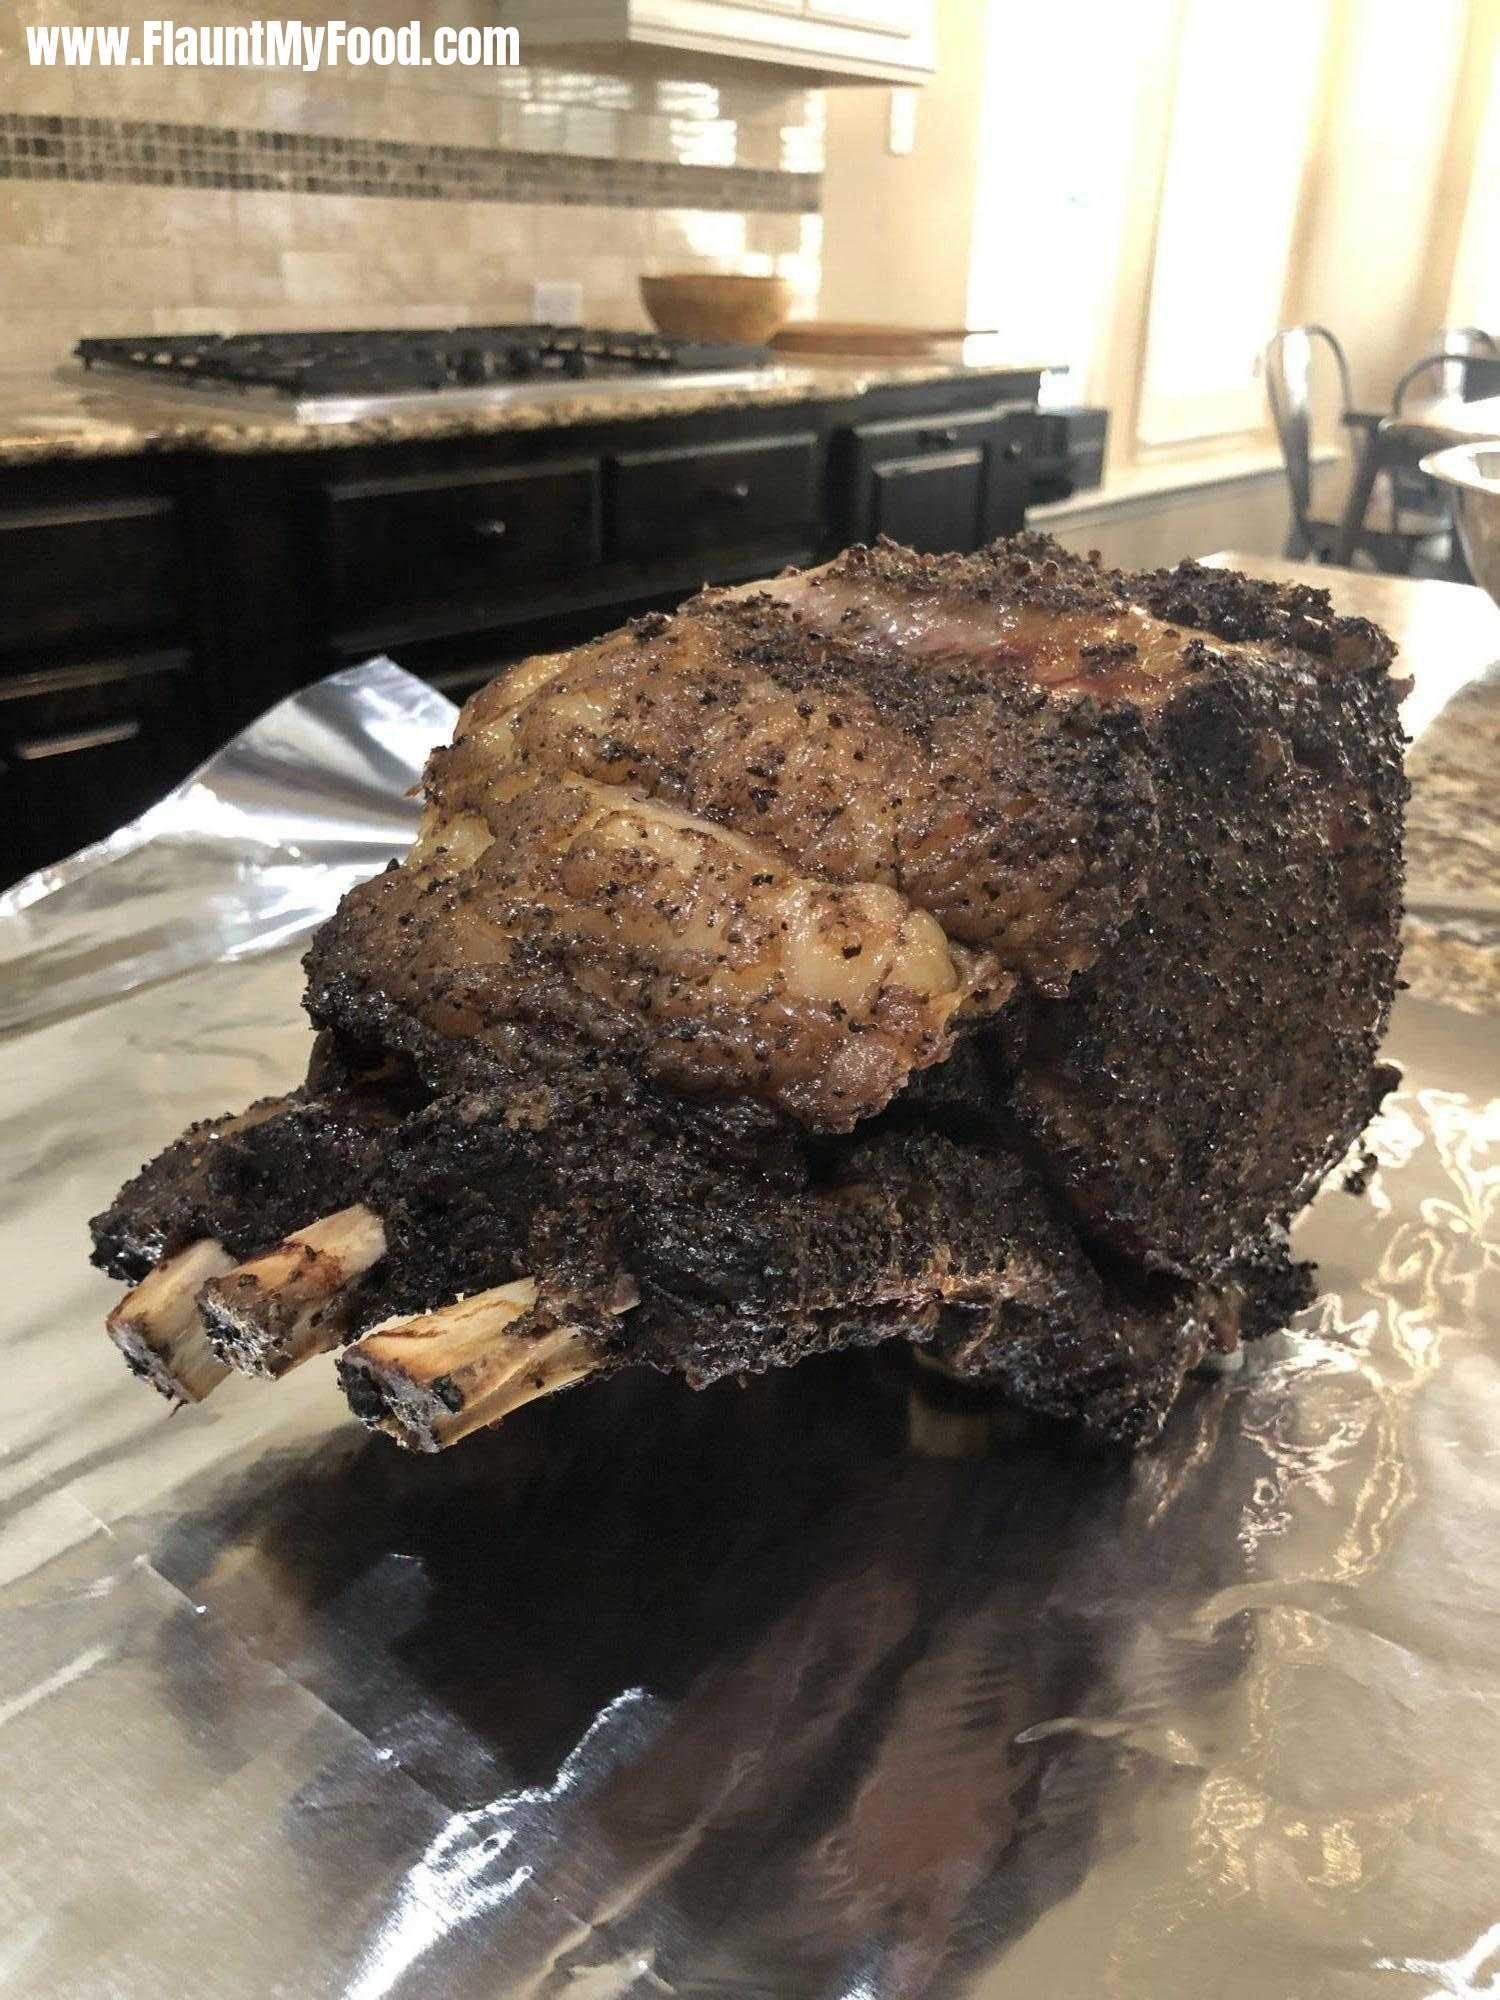 Smoked prime rib by Candyman in Fort Worth Texas on a green egg until the center reached 130° FSmoked prime rib by Candyman in Fort Worth Texas on a green egg until the center reached 130° F